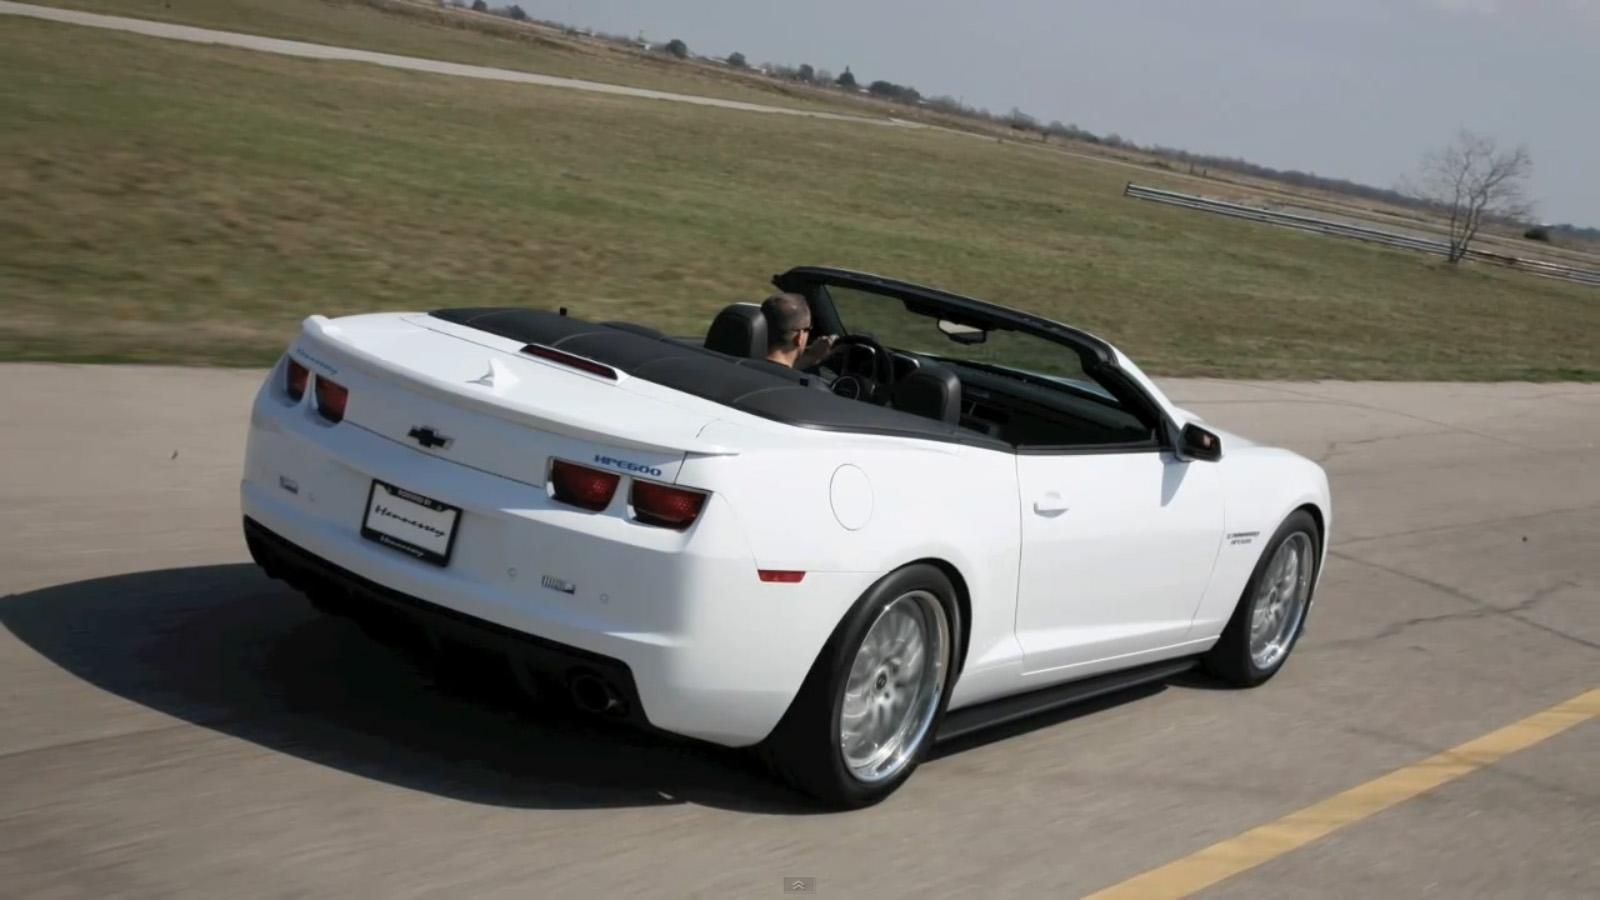 2011 Chevrolet Camaro Convertible 'HPE600' by Hennessey